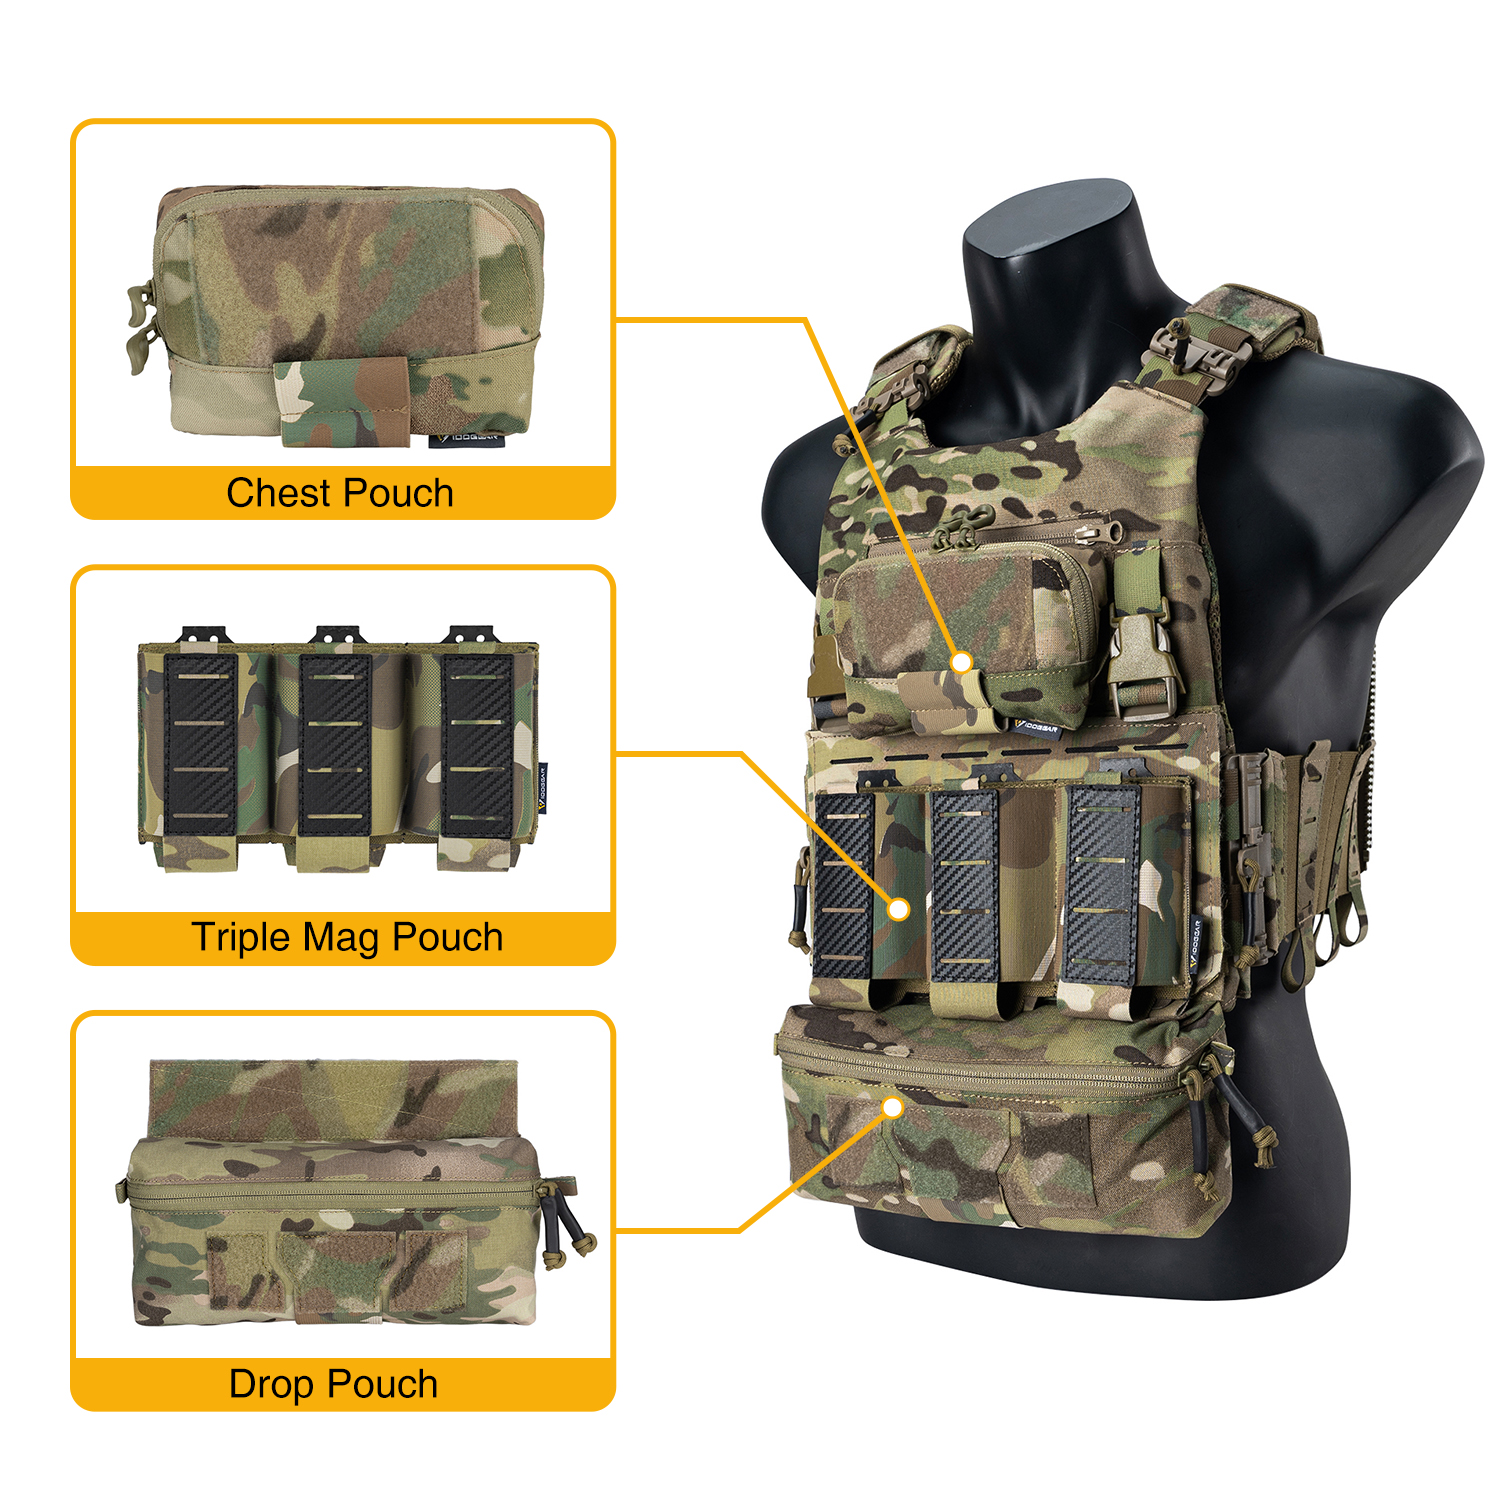 IDOGEAR Tactical Vest with Drop Pouch, Chest Pouch and Triple Mag Pouch Camouflage Military Quick Release Laser Cut Combat Vest Set